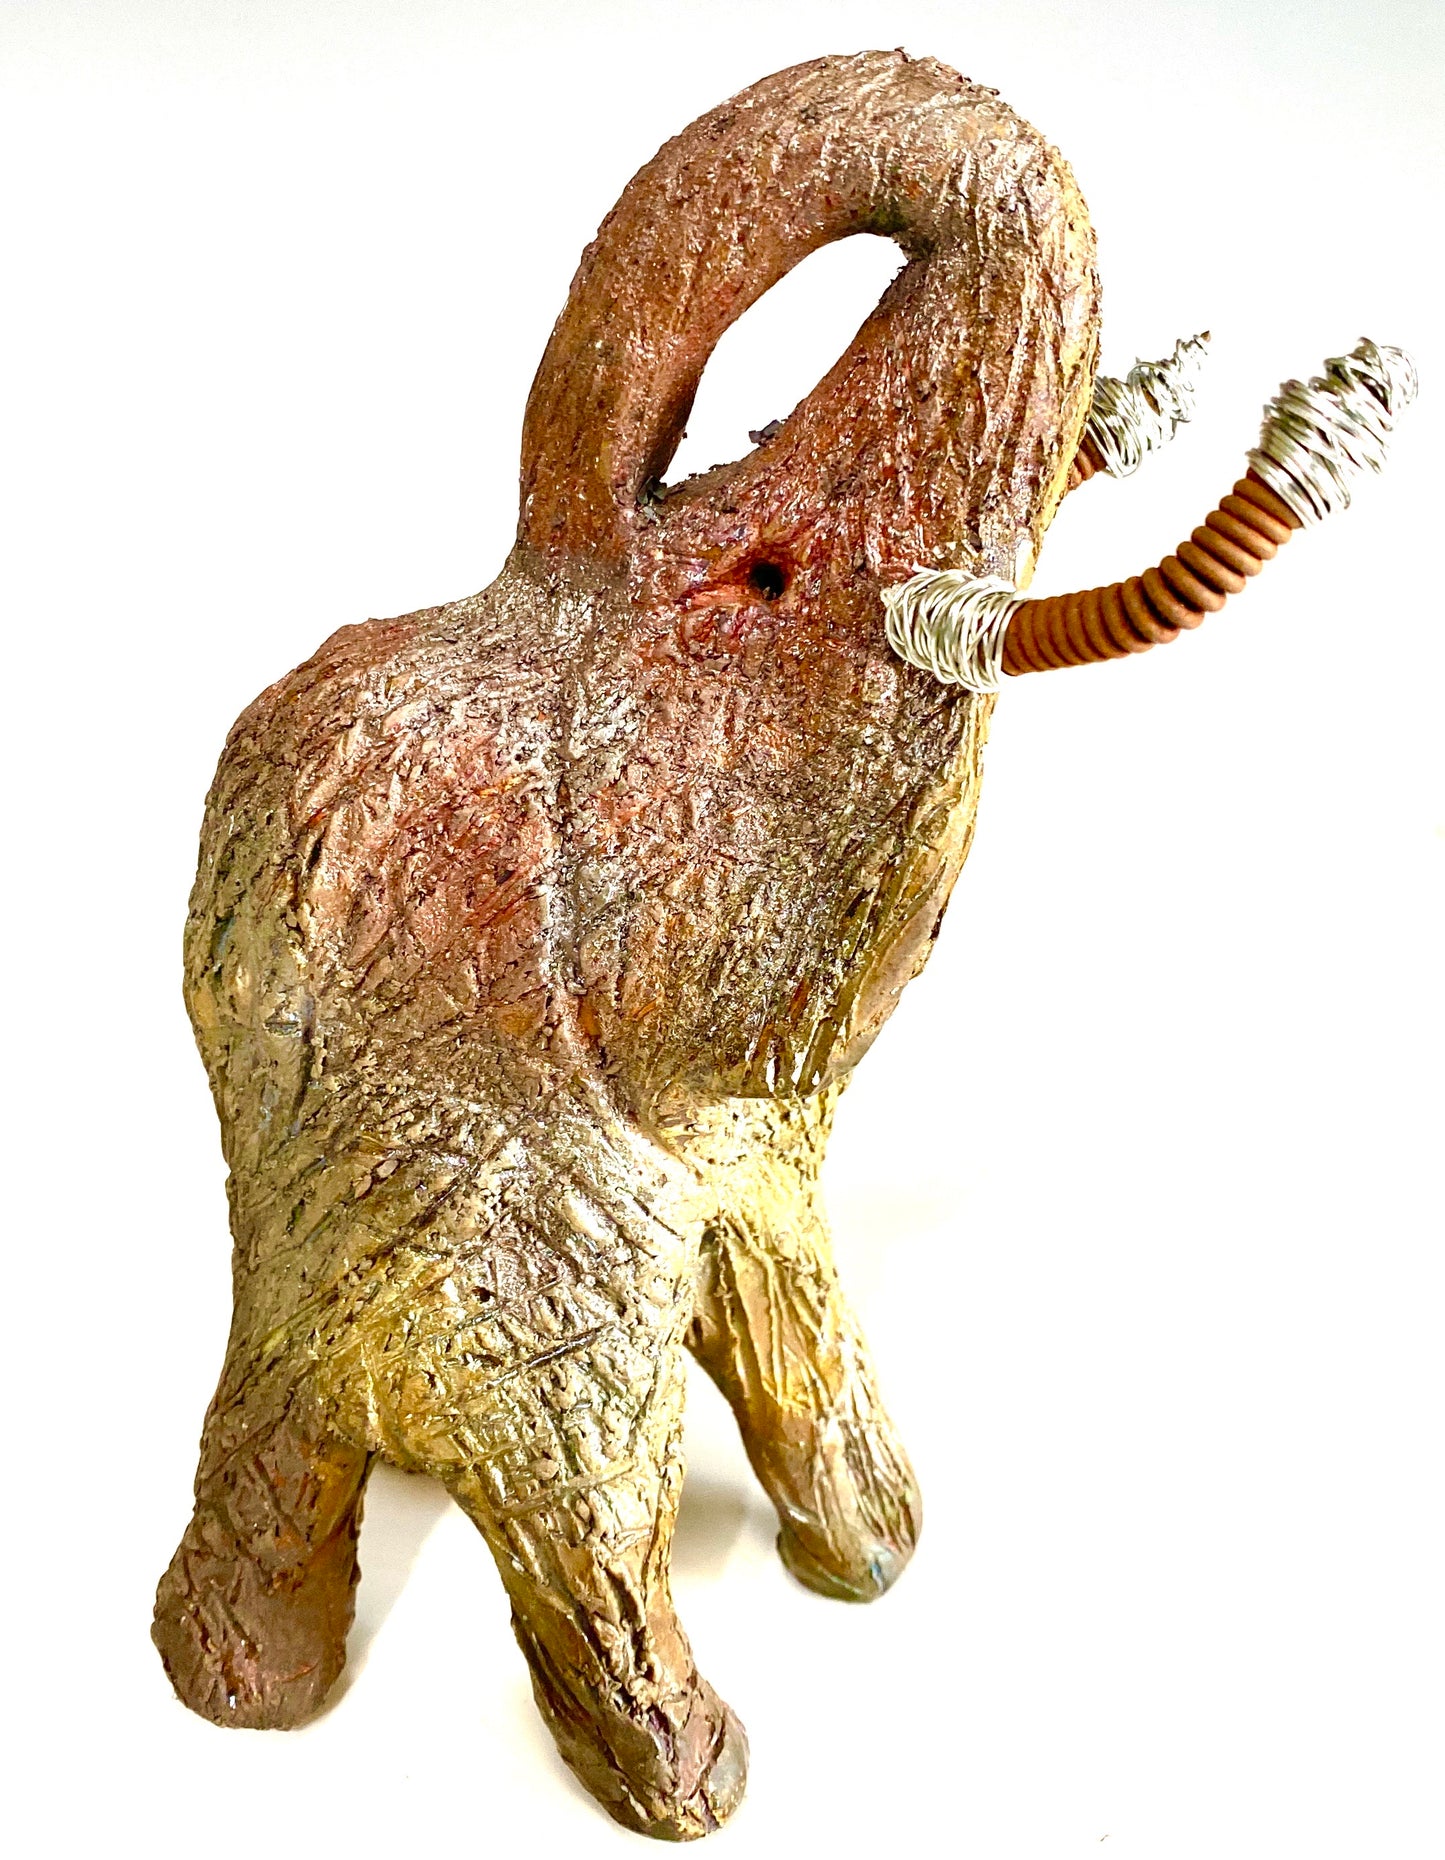 Raku Elephant Have you HERD!!!!!!  Just one of these lovely Raku Fired Elephant will make an excellent gift for your  friend, sorority or for your home’ special place centerpiece.  6" x 5" x 5" 1 lbs Beautiful metallic raku elephant For decorative purposely only